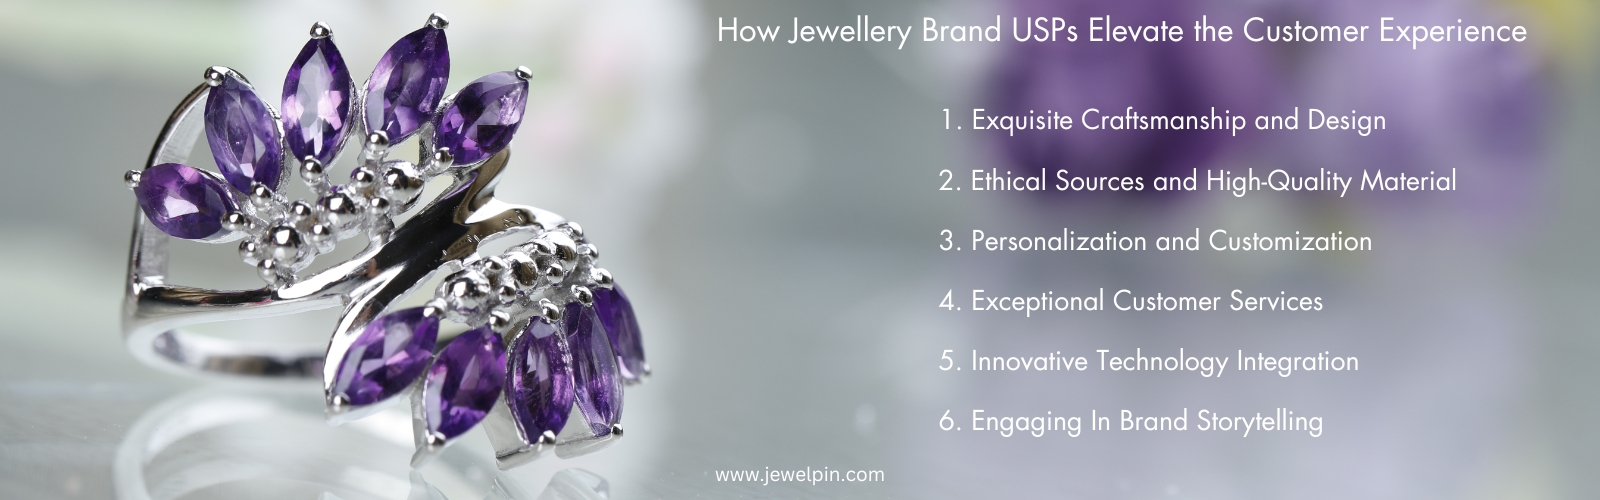 how jewelry brand usps elevate the customer experience